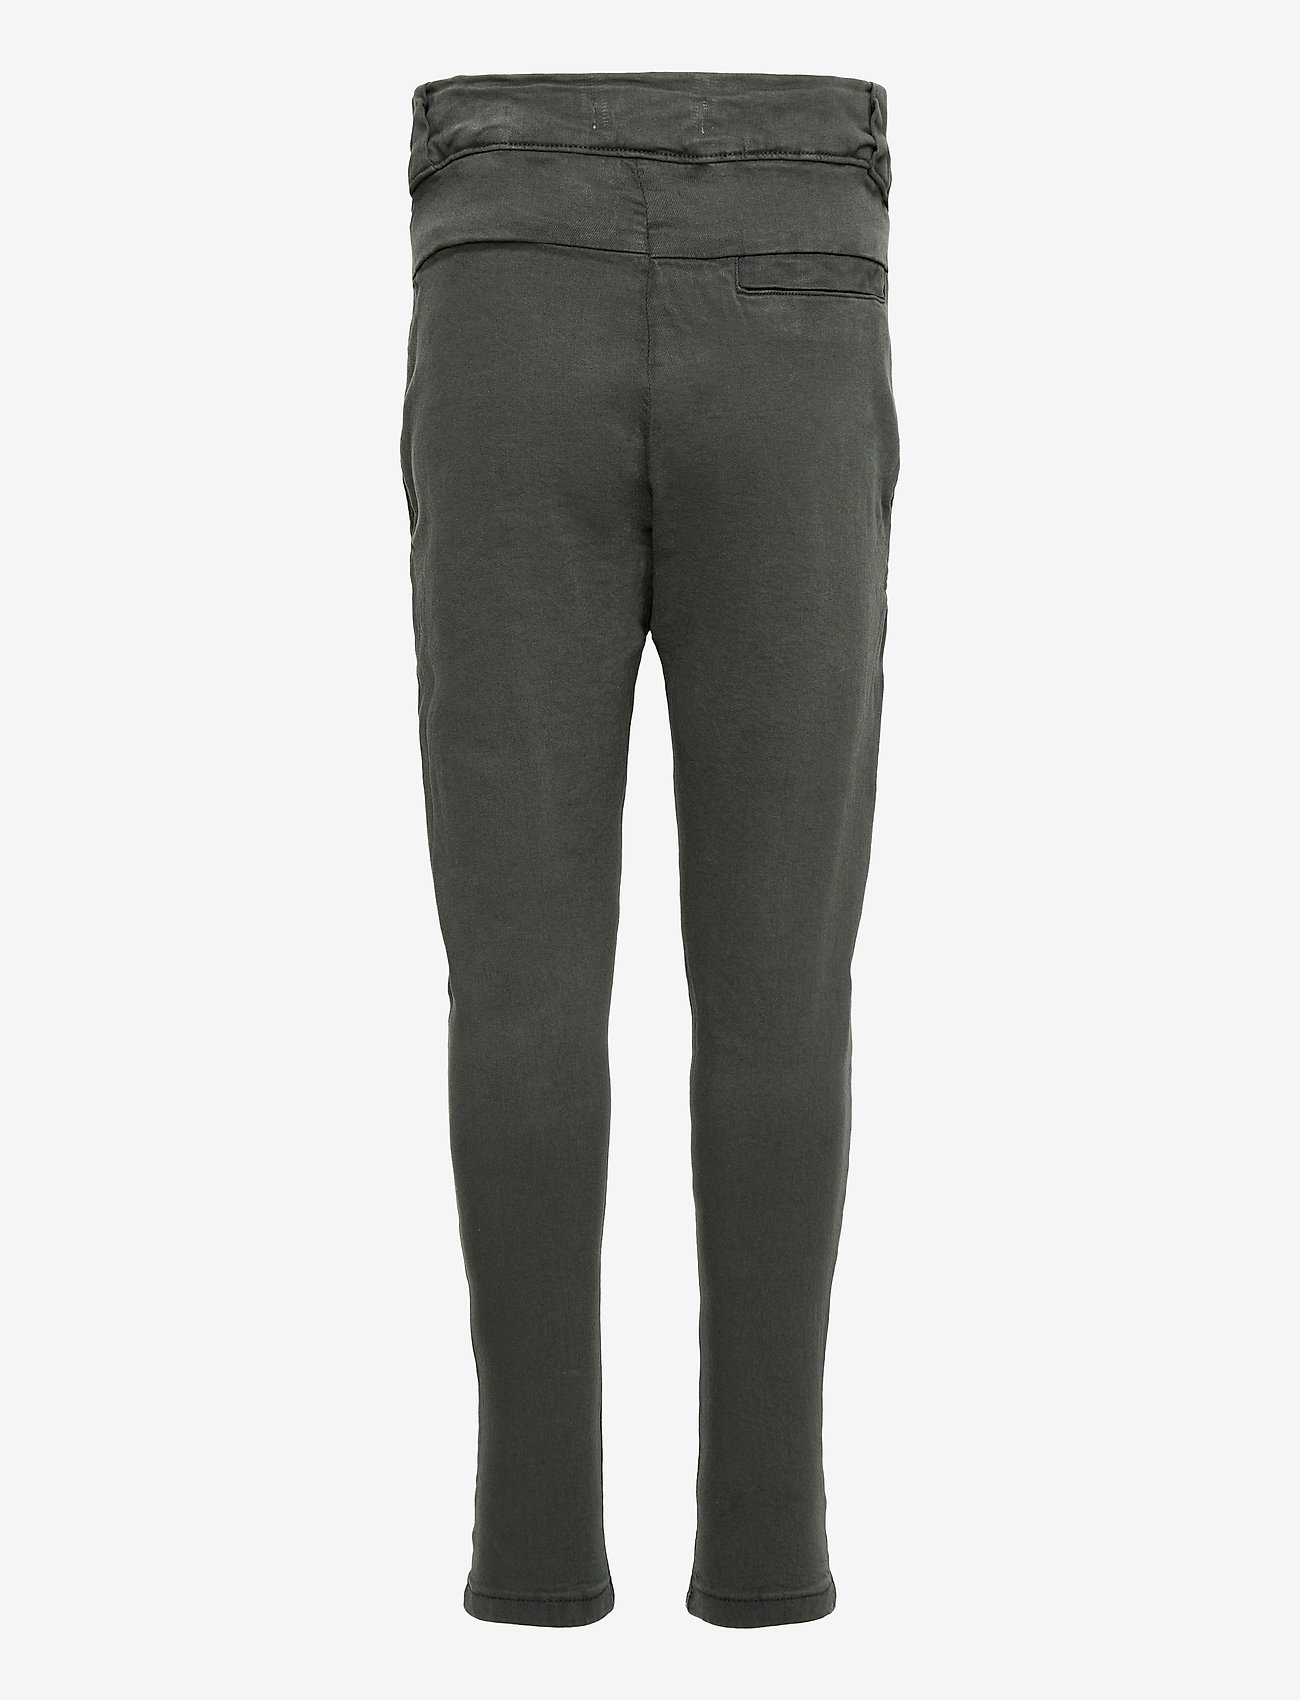 Costbart - NATE CHINO PANTS - gode sommertilbud - grey - 1